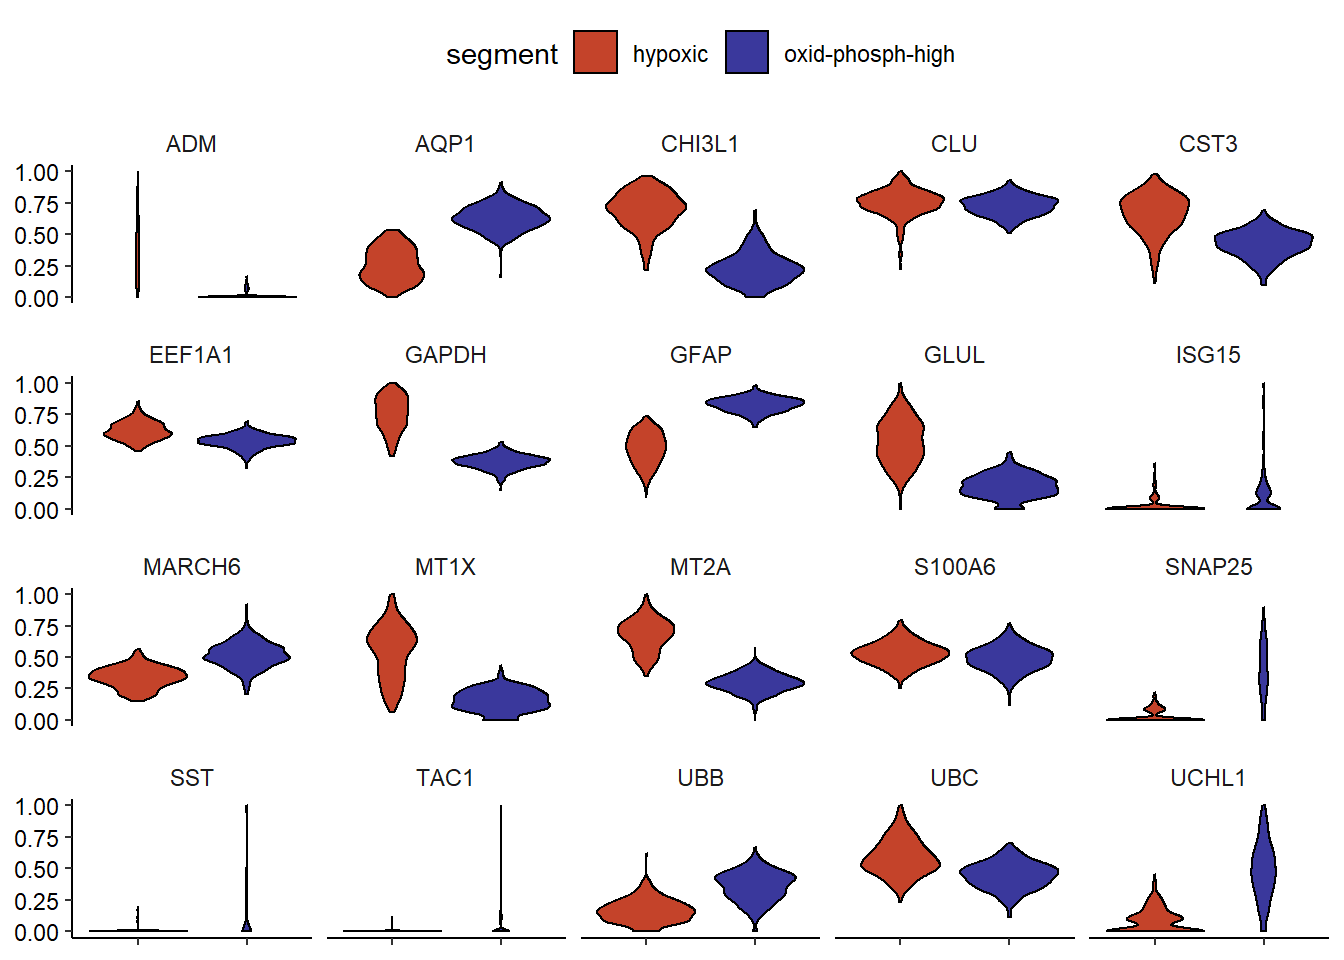 Figure 2.2) Violinplot visualizing the differentially expressed genes